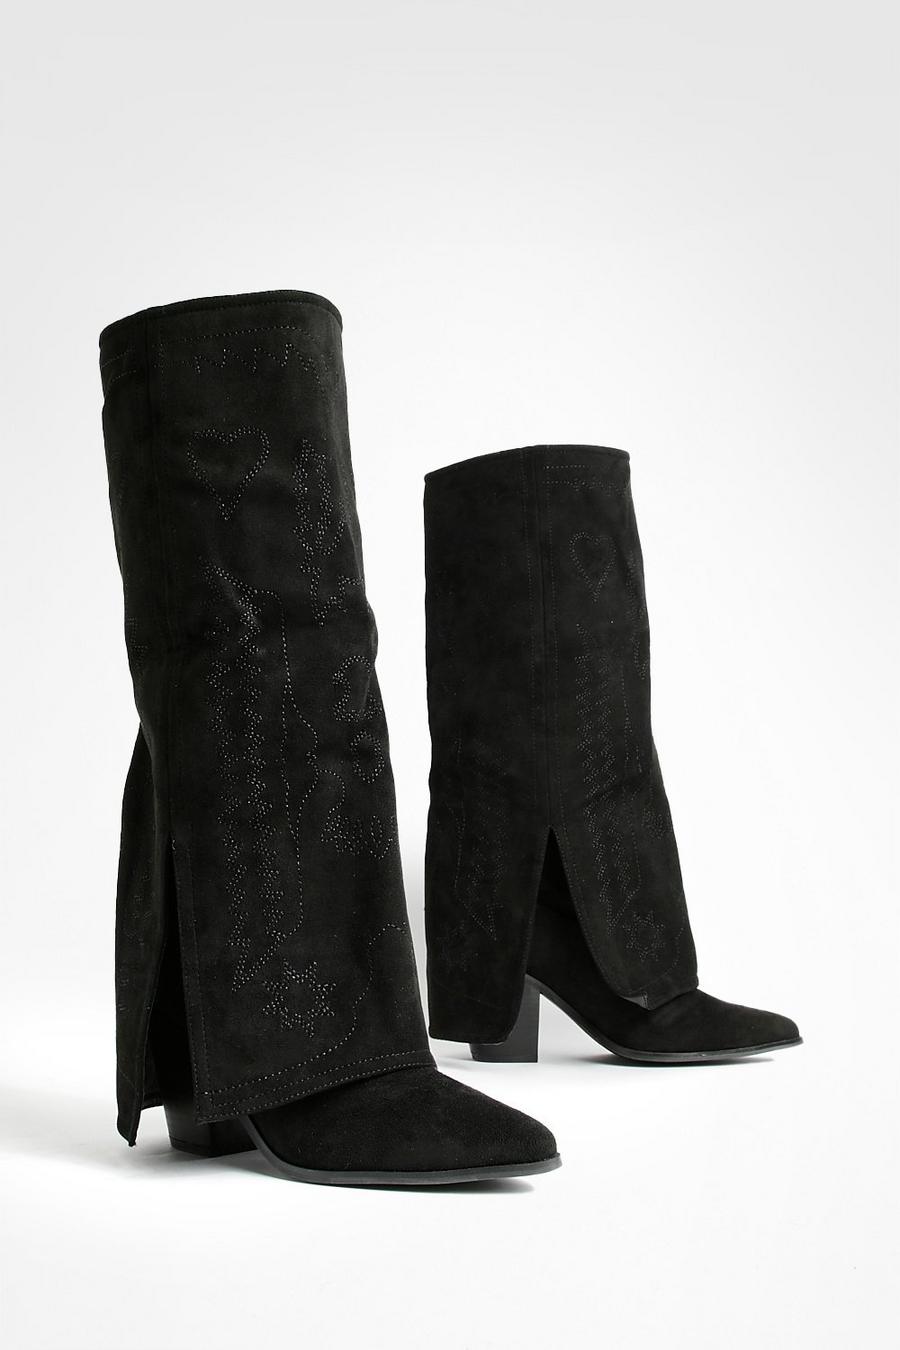 Black Wide Fit Foldover Western Knee High Boots 